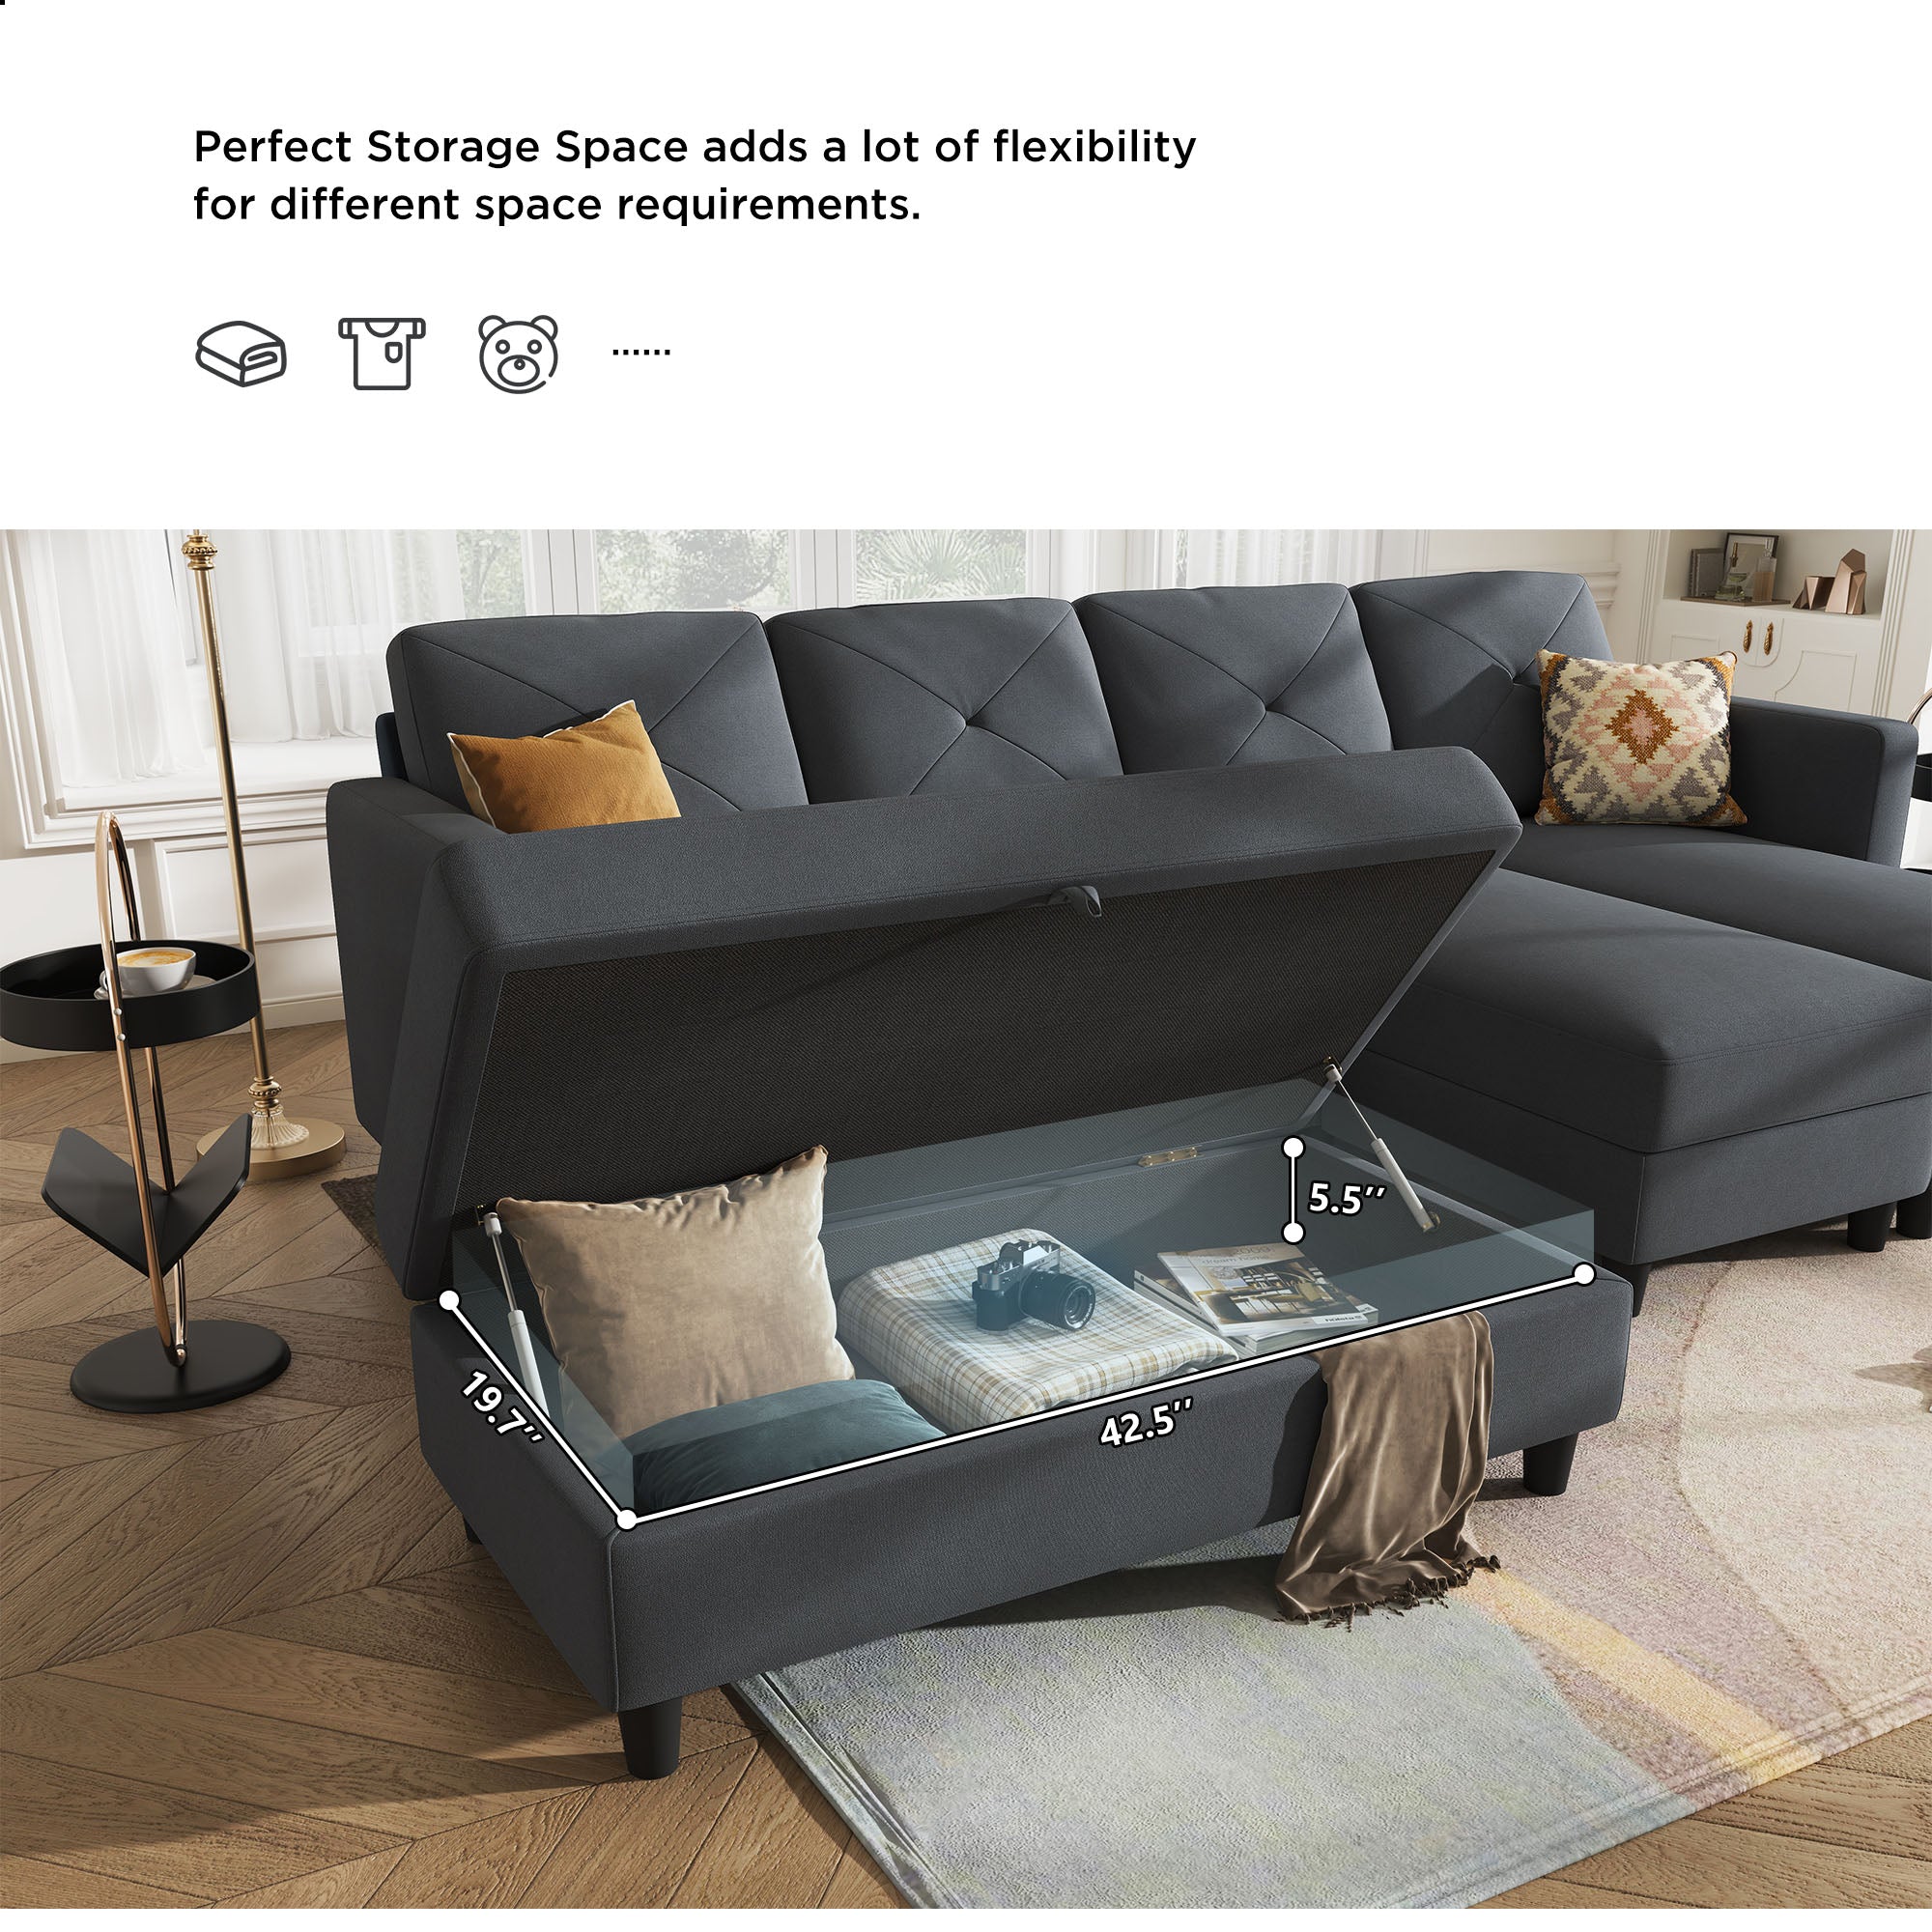 HONBAY Storage Ottoman for U-Shaped Sectional Sofa Couch